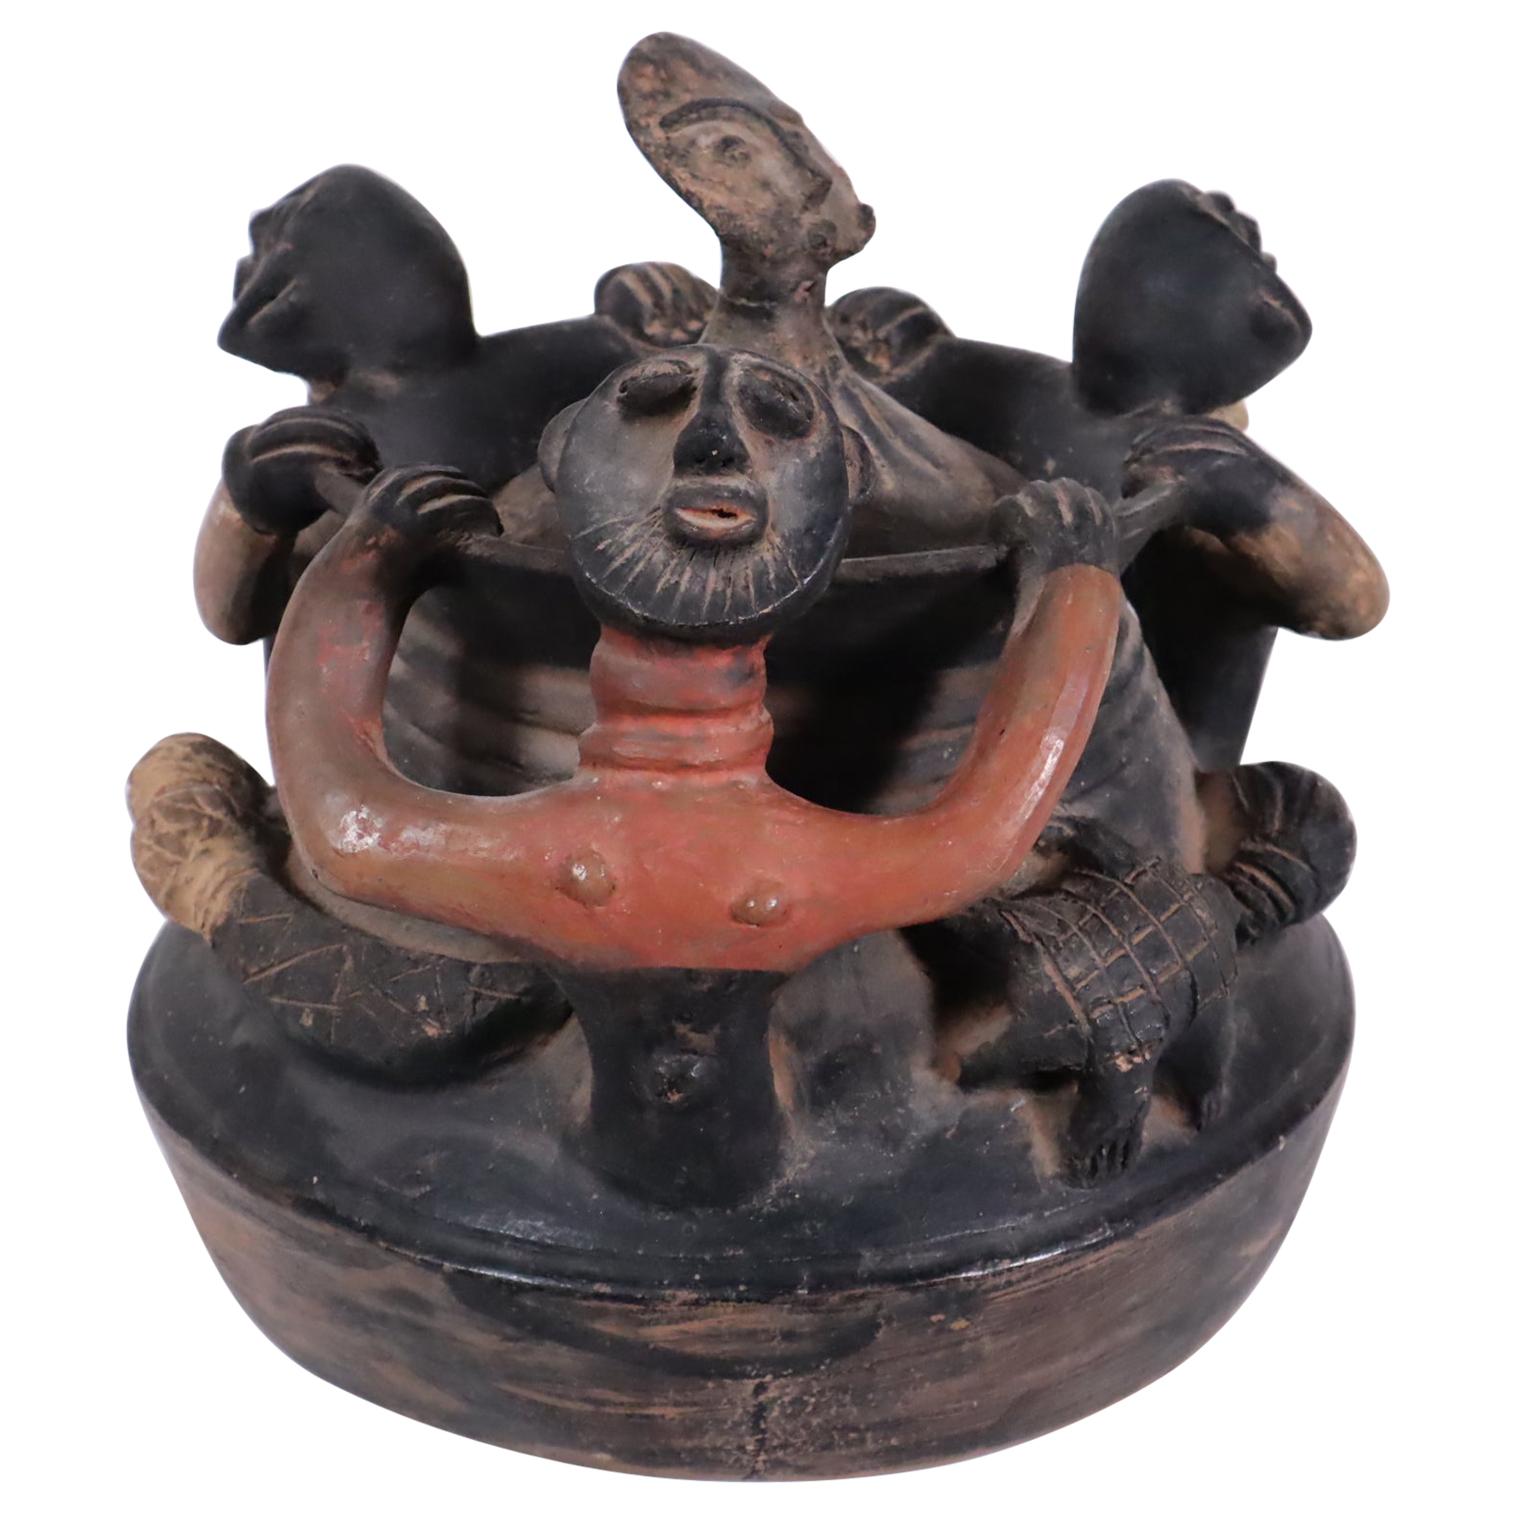 Store closing. Last chance clearance sale  Published Treasure Vessel African Art For Sale